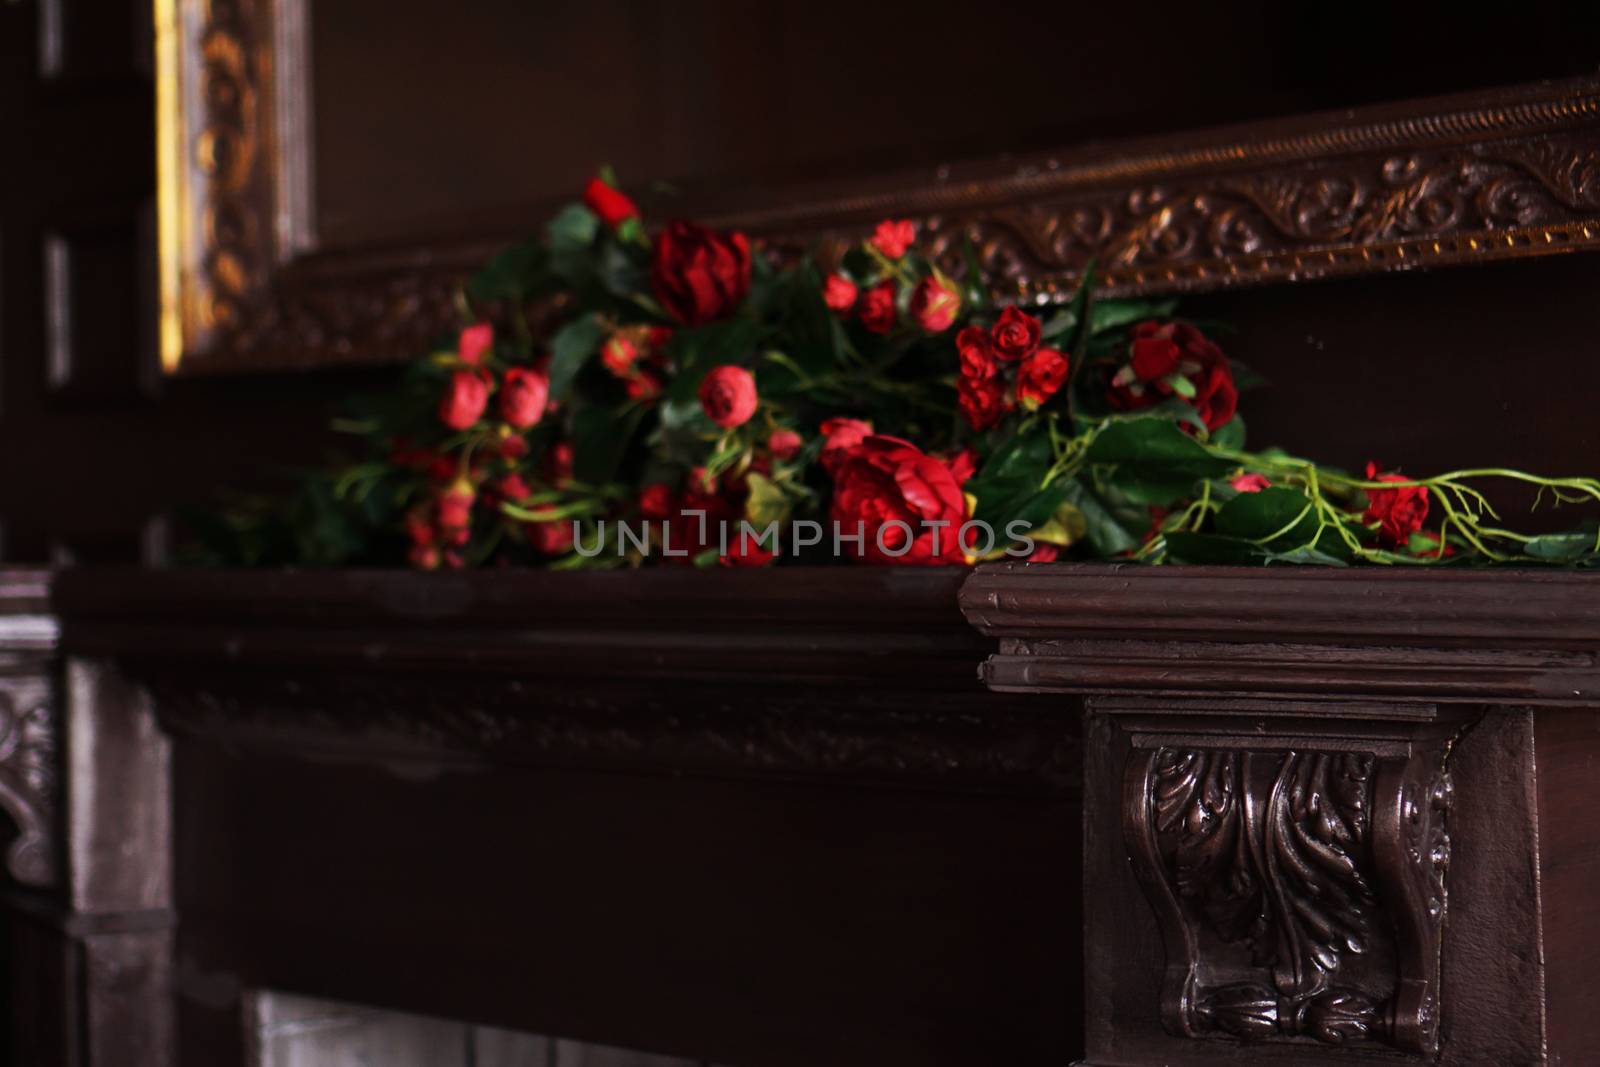 A fake flowers arrangement on a brown fireplace mantel